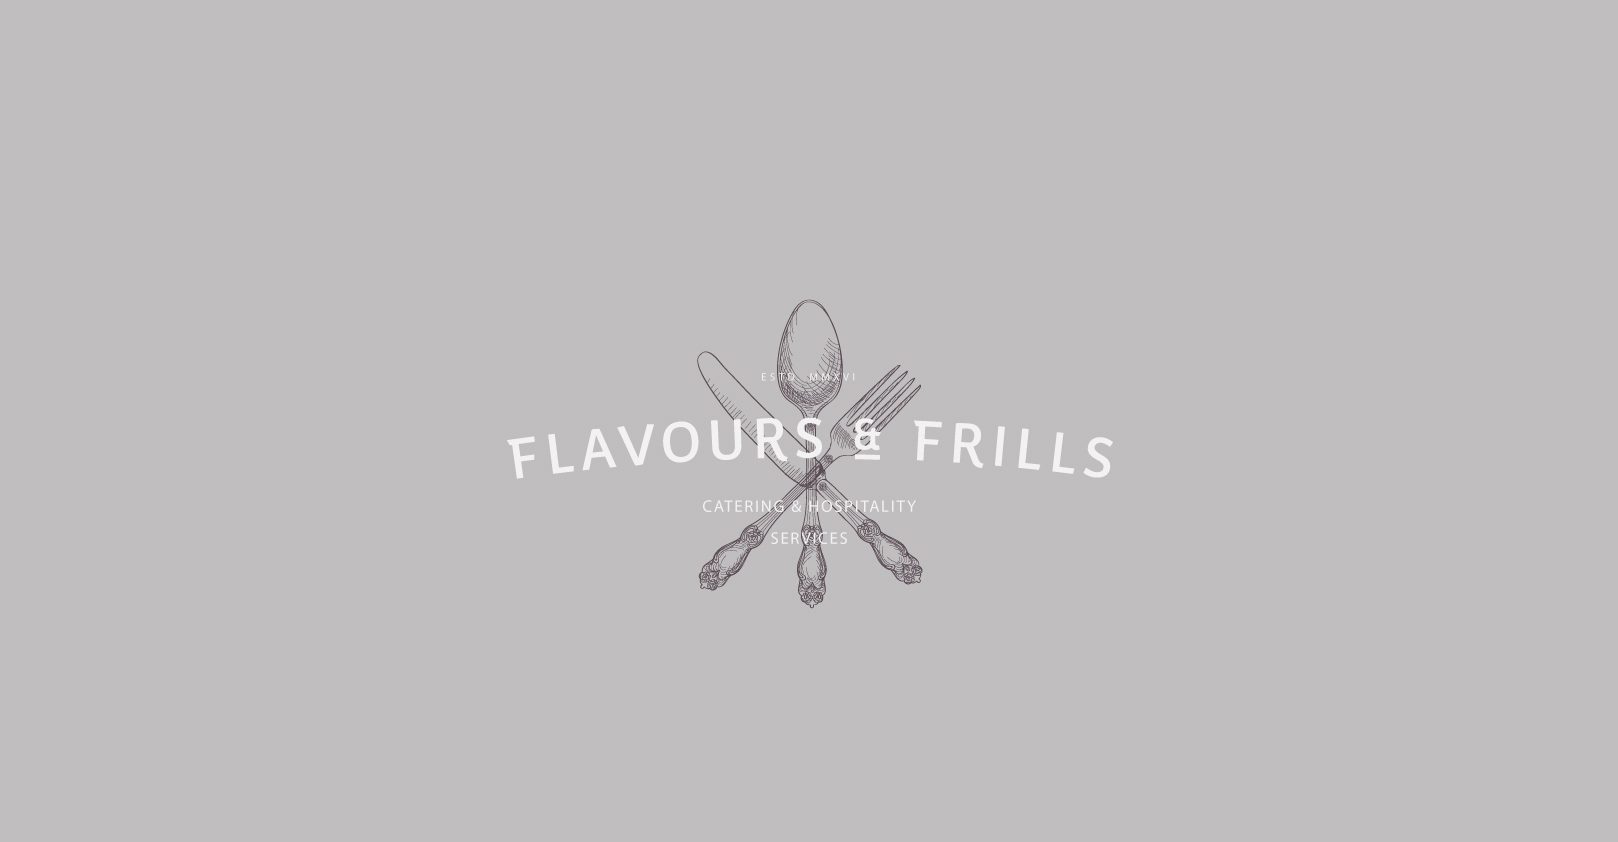 Flavours & Frills